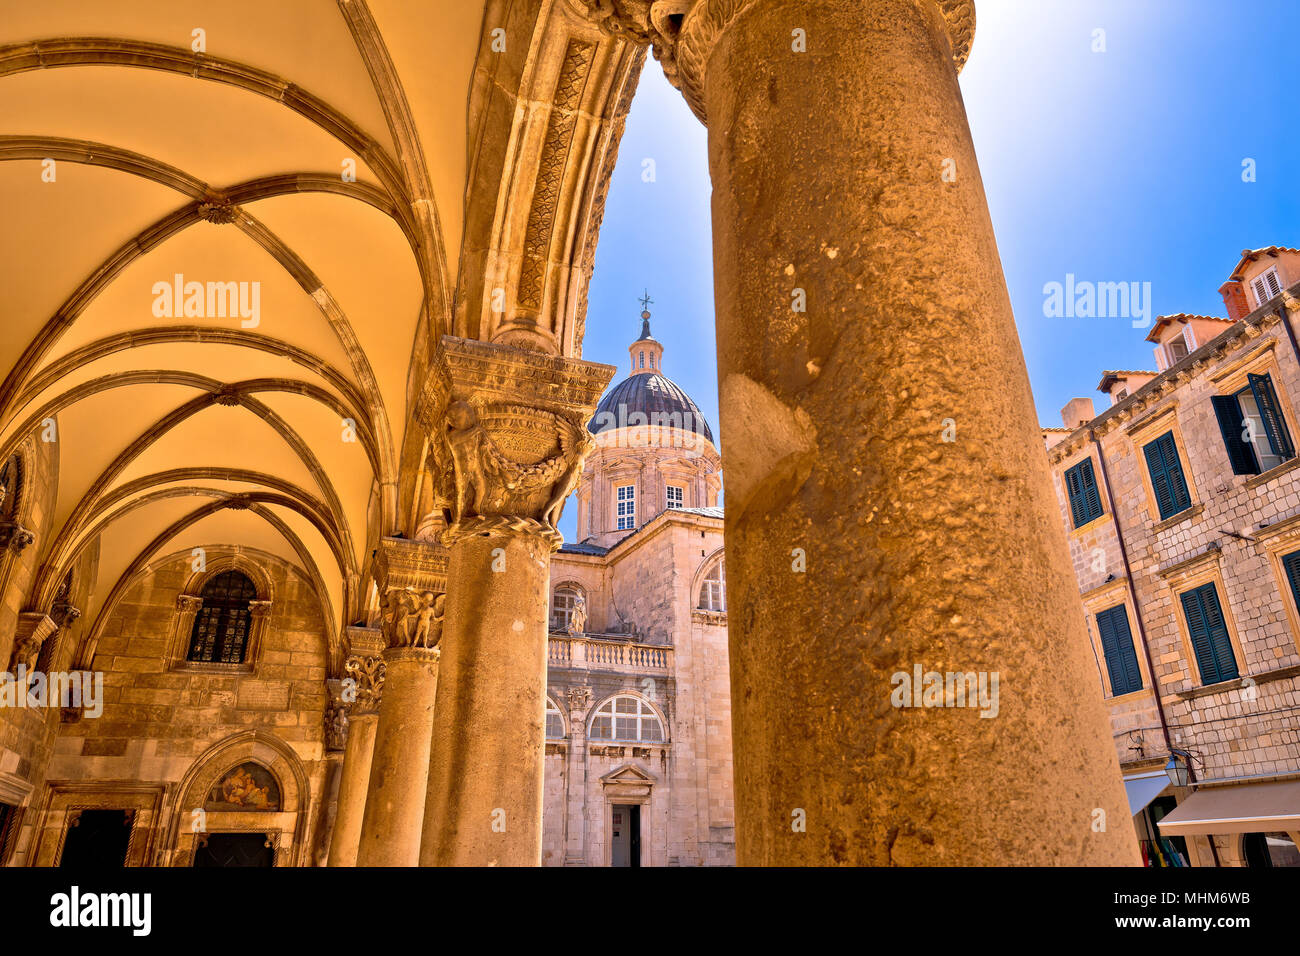 Dubrovnik street historic architecture and arches view, the Assumption Cathedral, Dalmatia region of Croatia Stock Photo